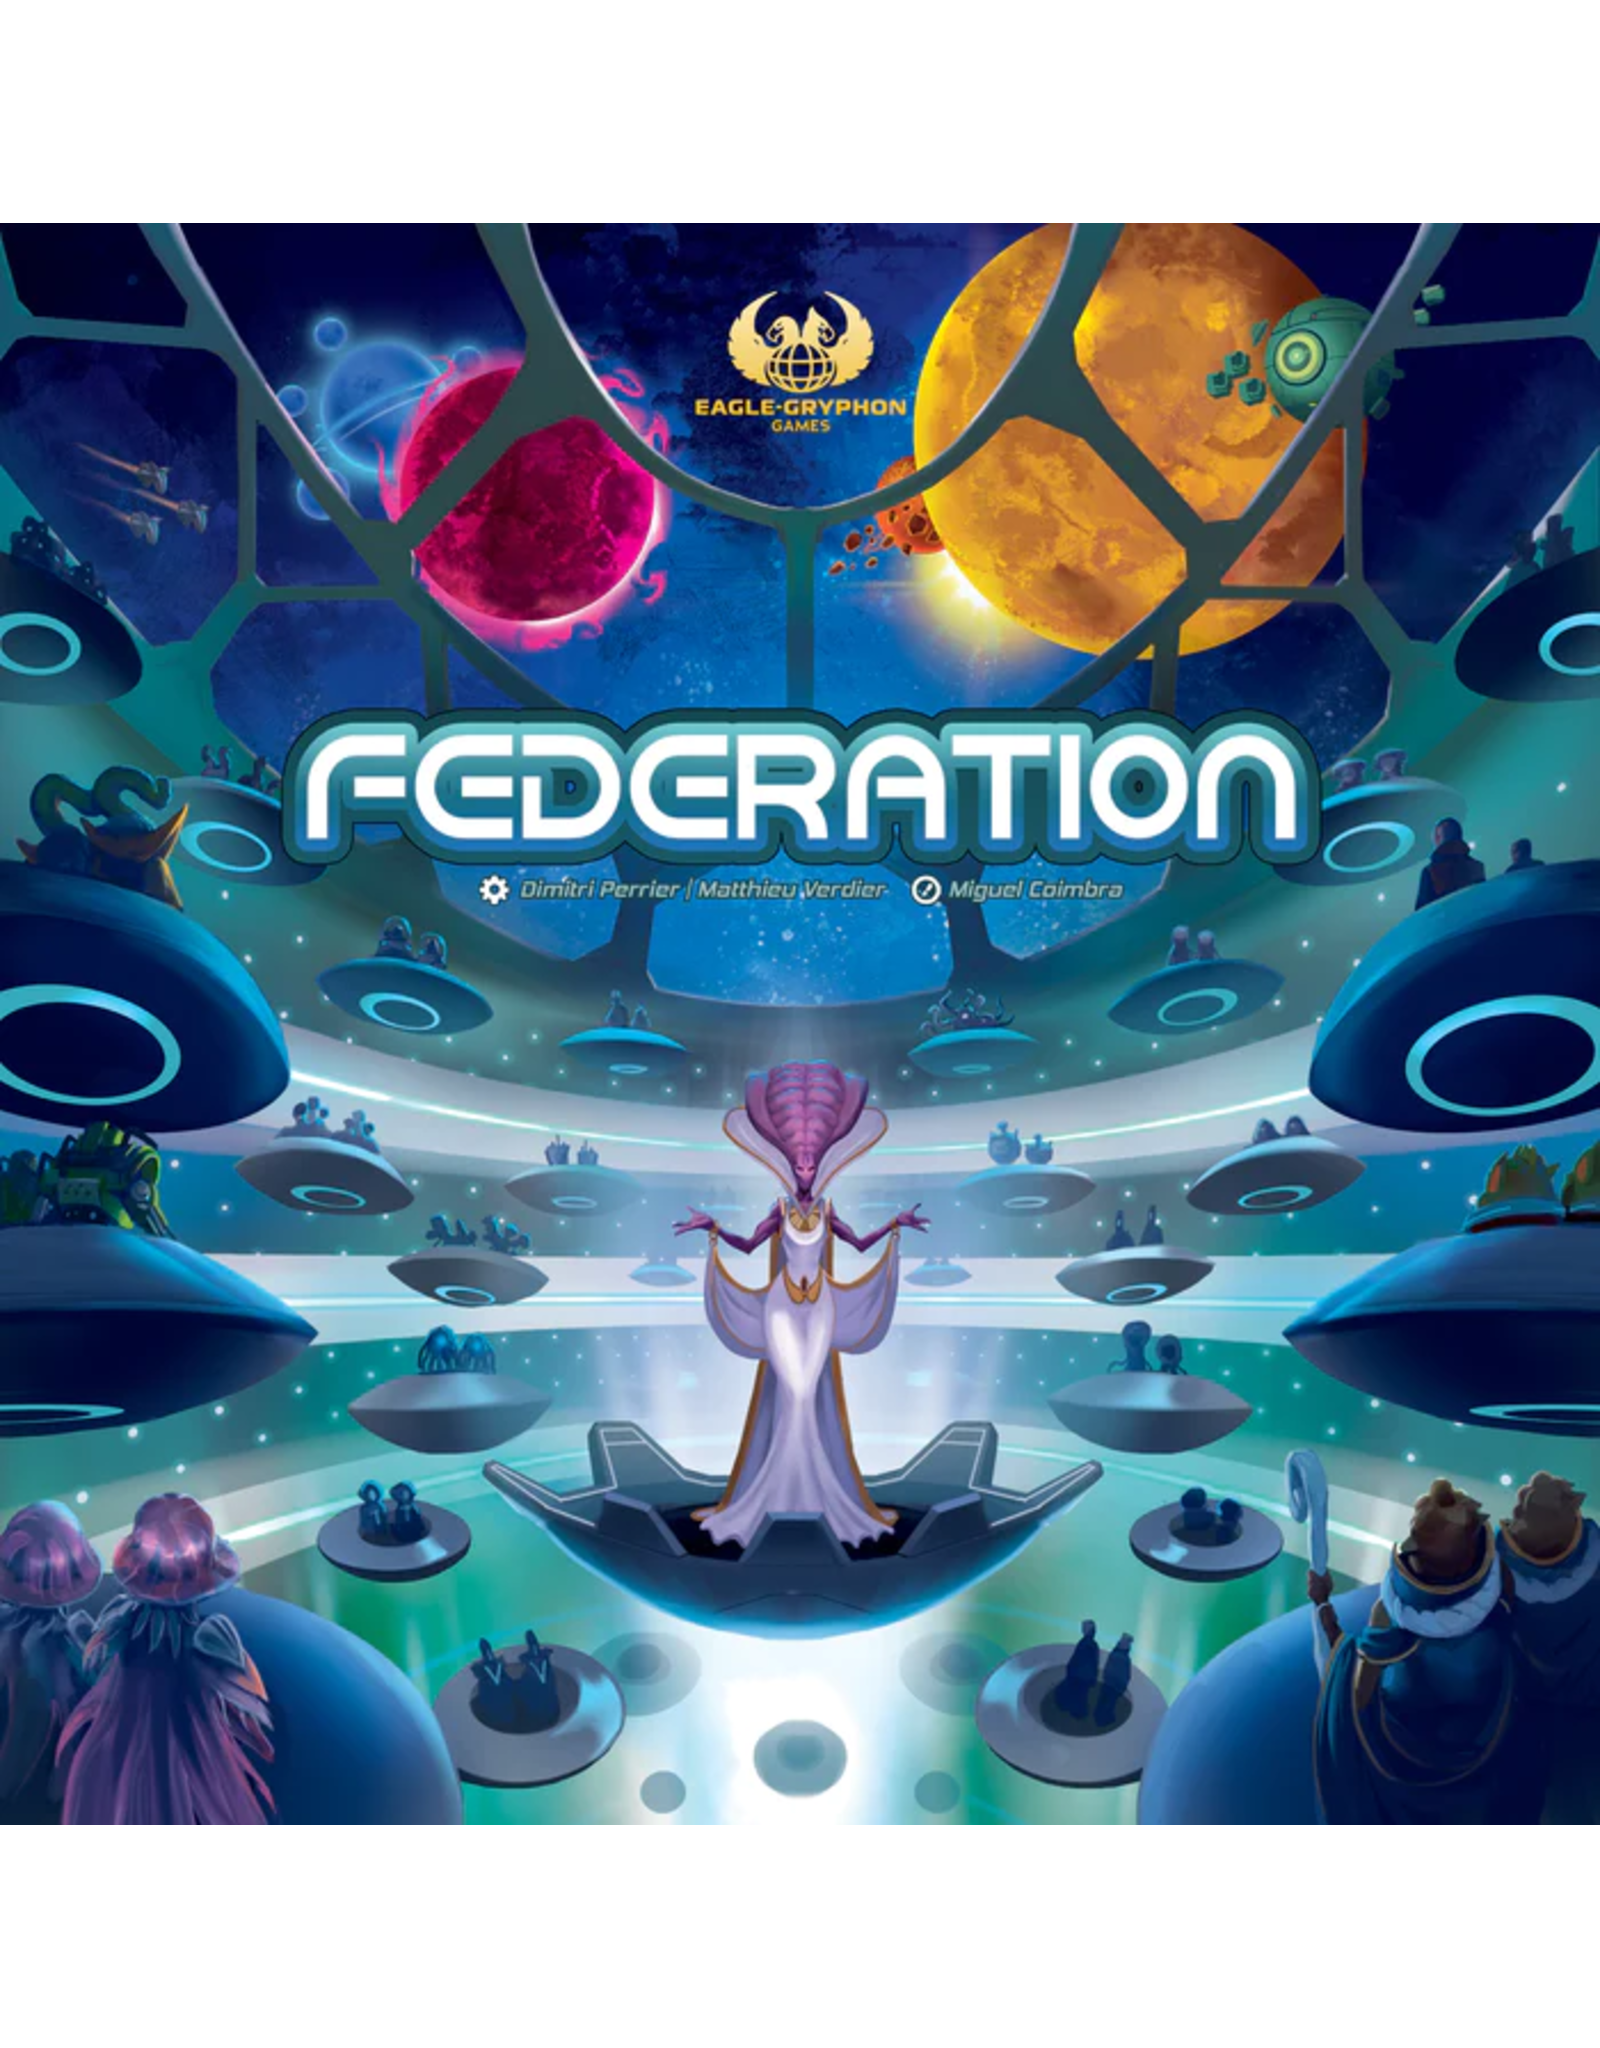 Eagle/Gryphon Federation Deluxe Edition